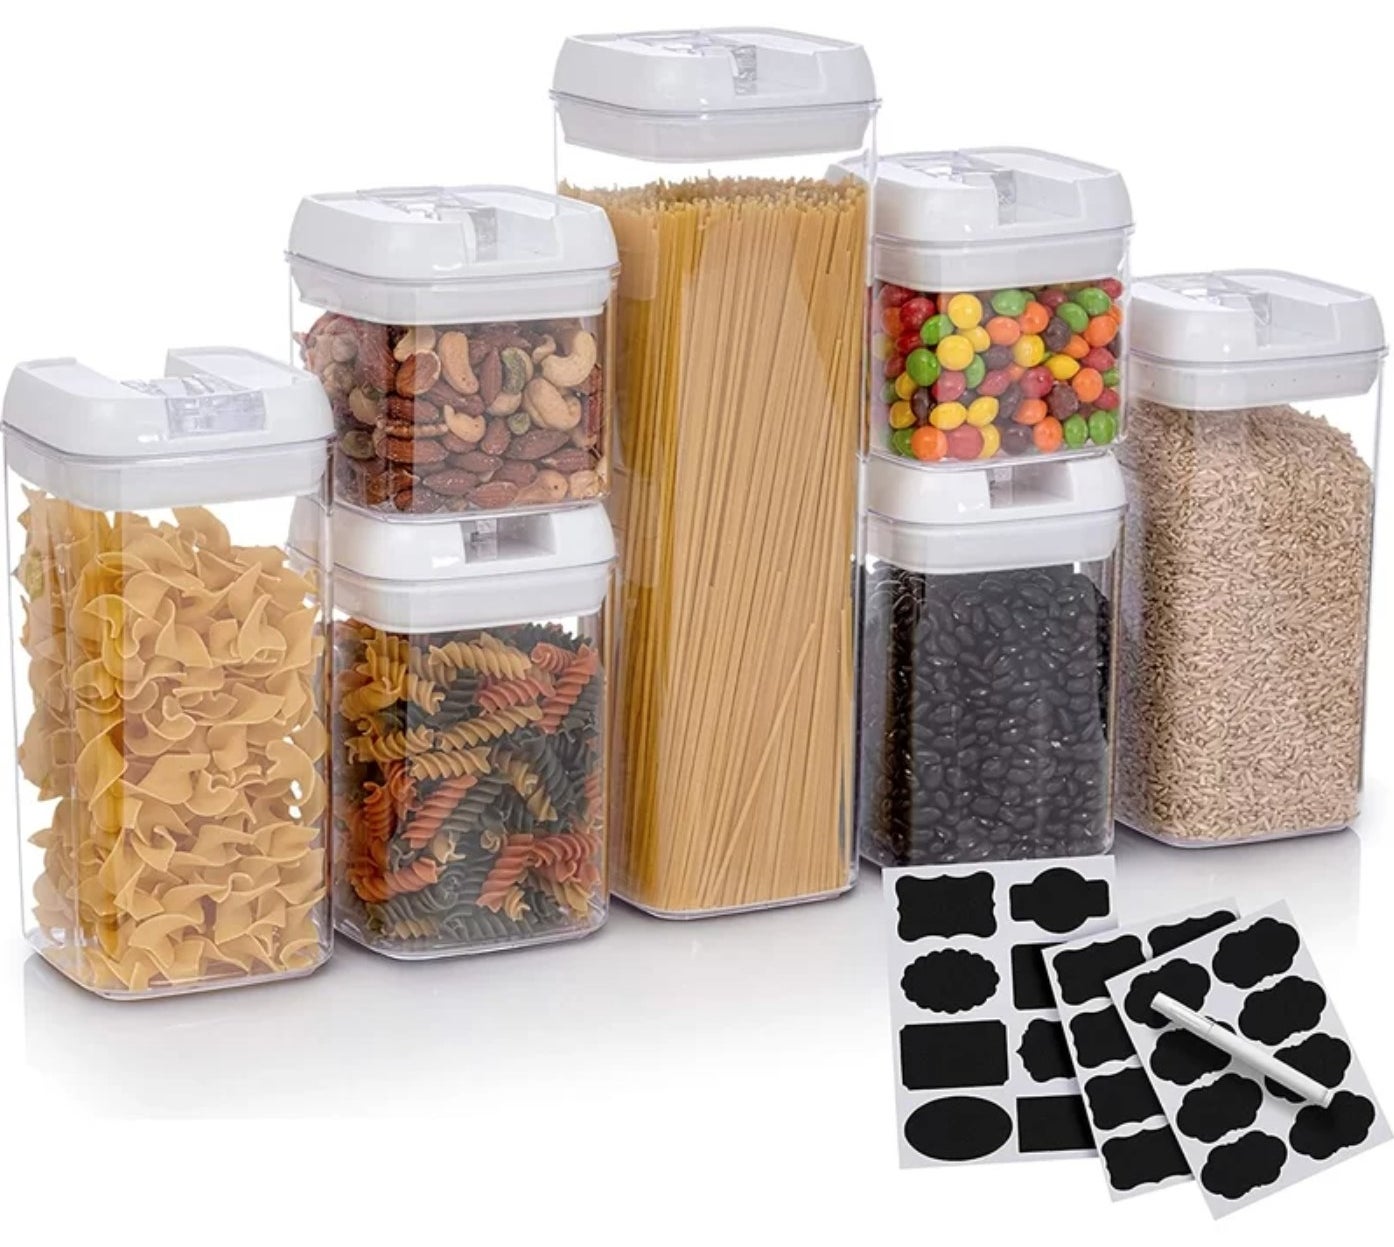 The seven container food storage set